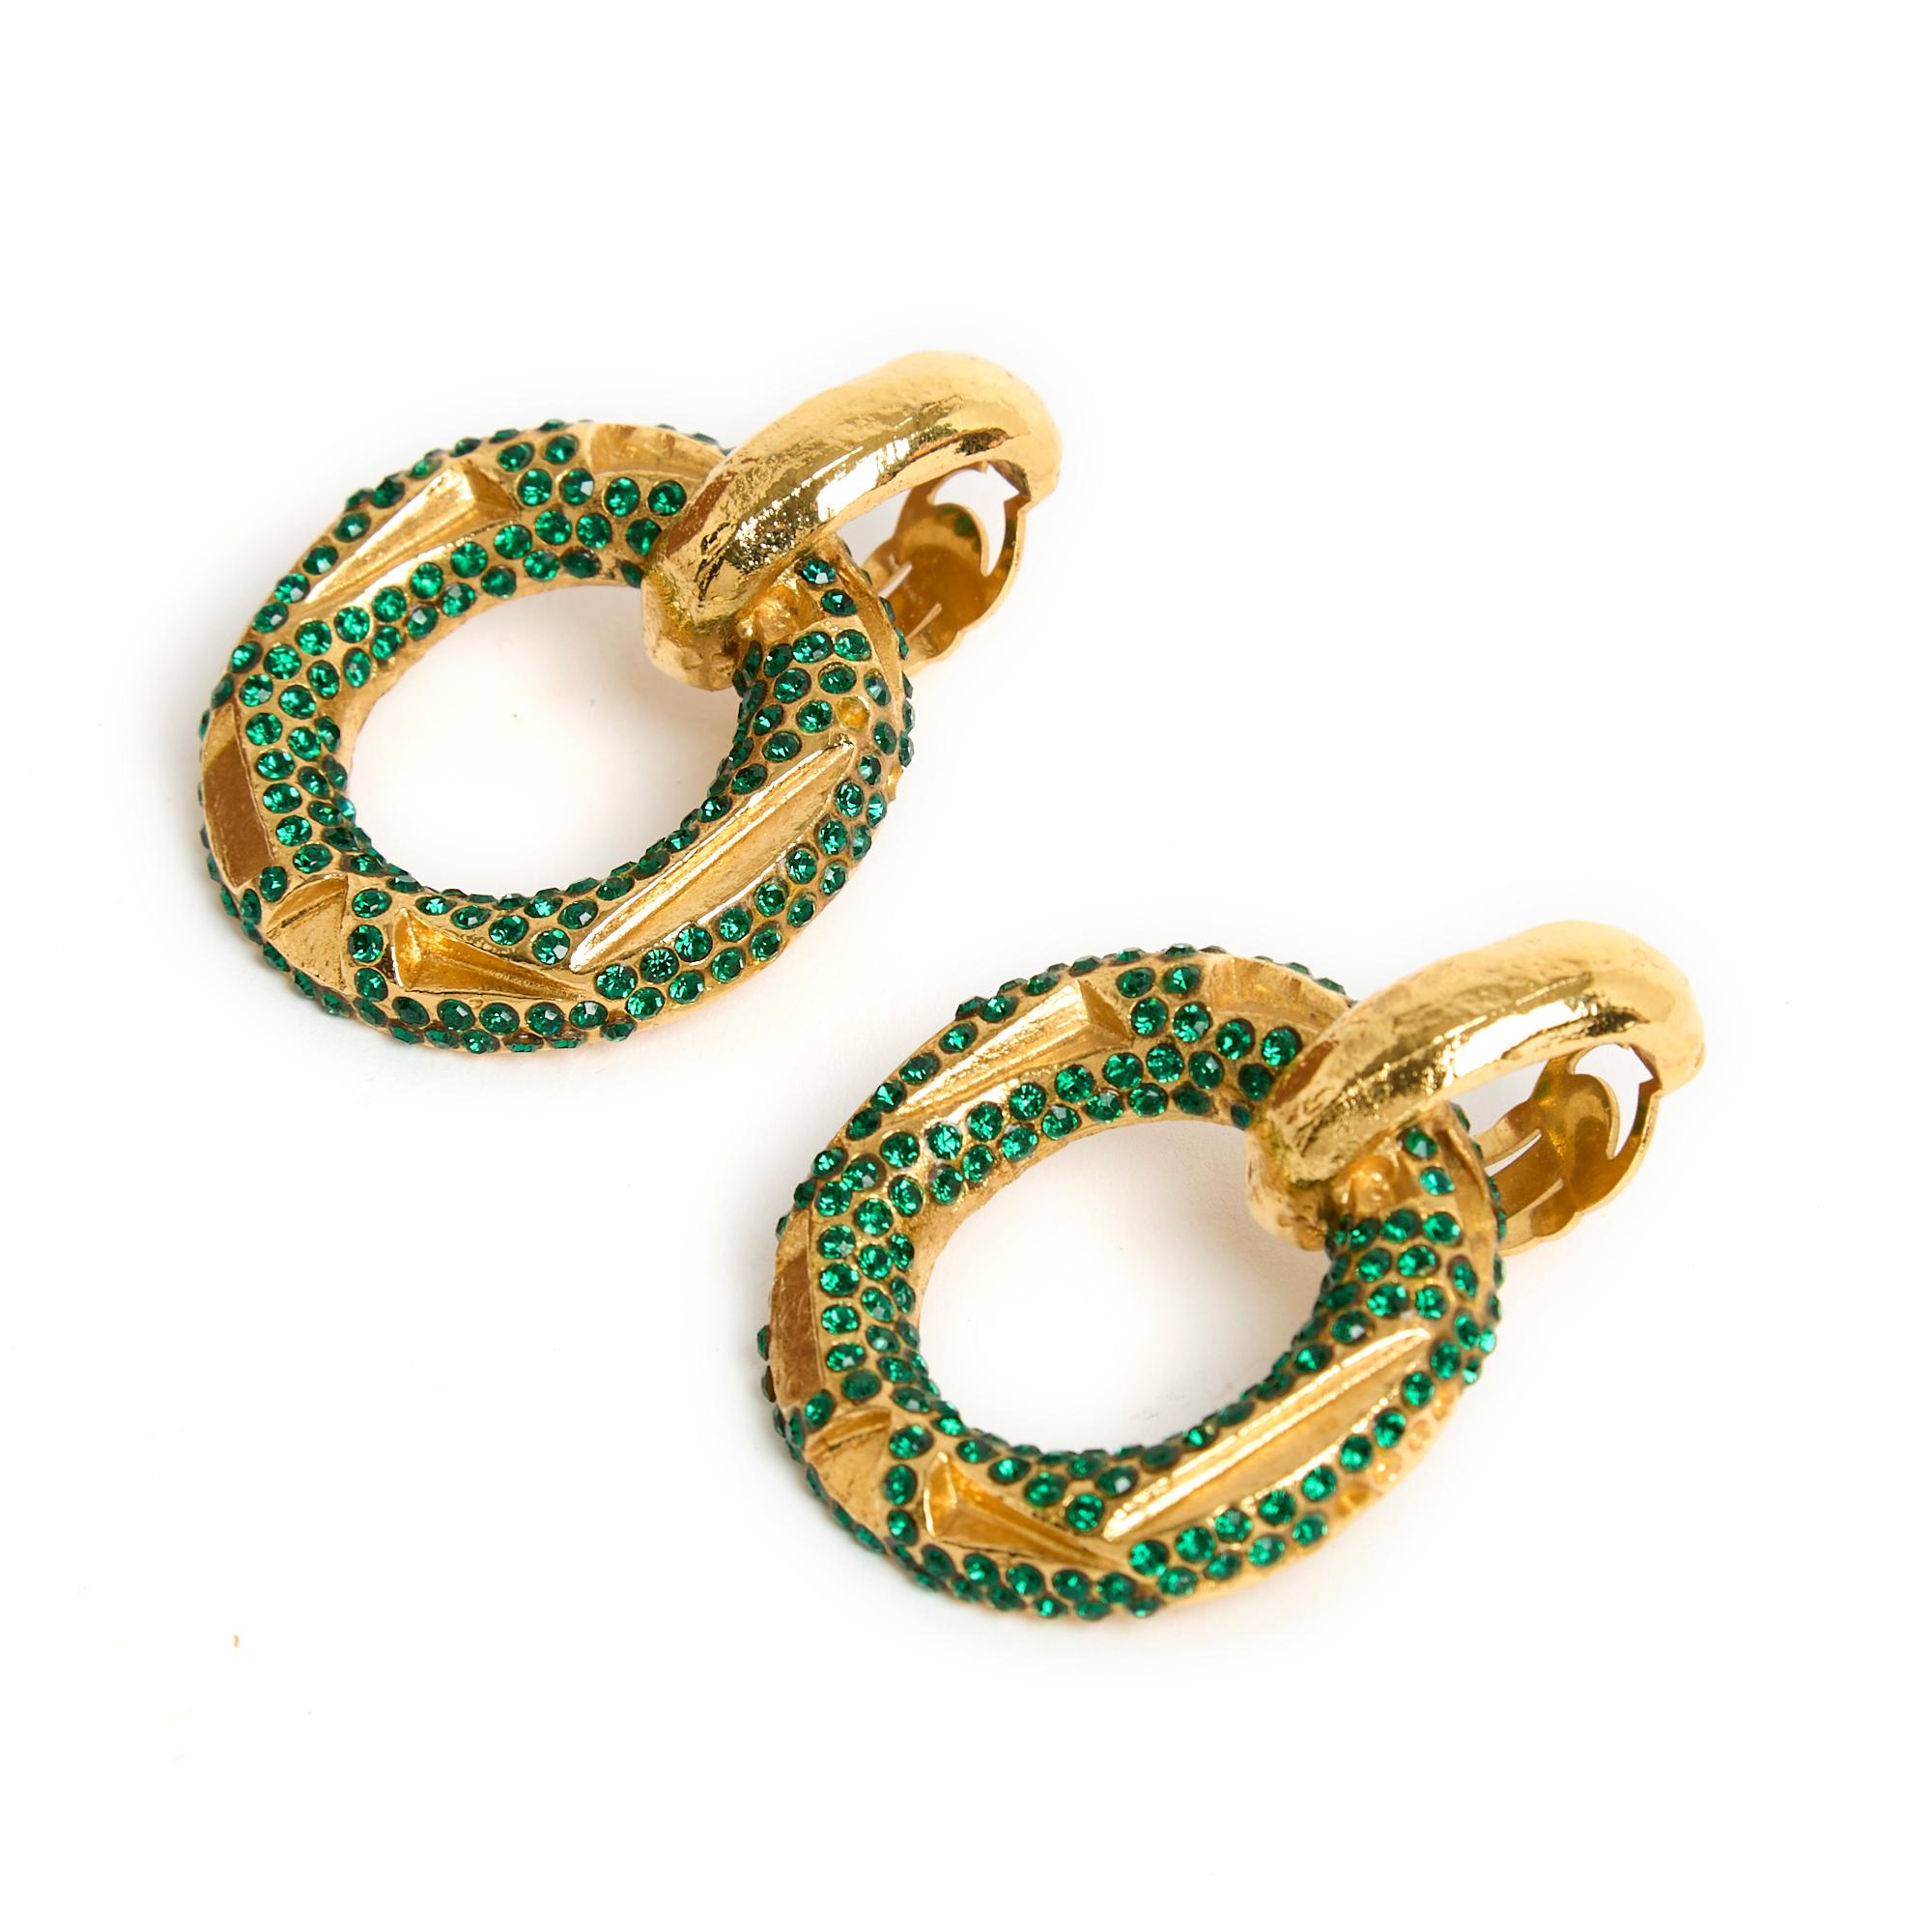 Lanvin earrings circa 1985 clips in shaped gold metal composed of a small hoop and a large fixed ring partially paved with green rhinestones. Total height 5.1 cm, pendant diameter 3.9 cm. The earrings are vintage, some rhinestones are missing on the